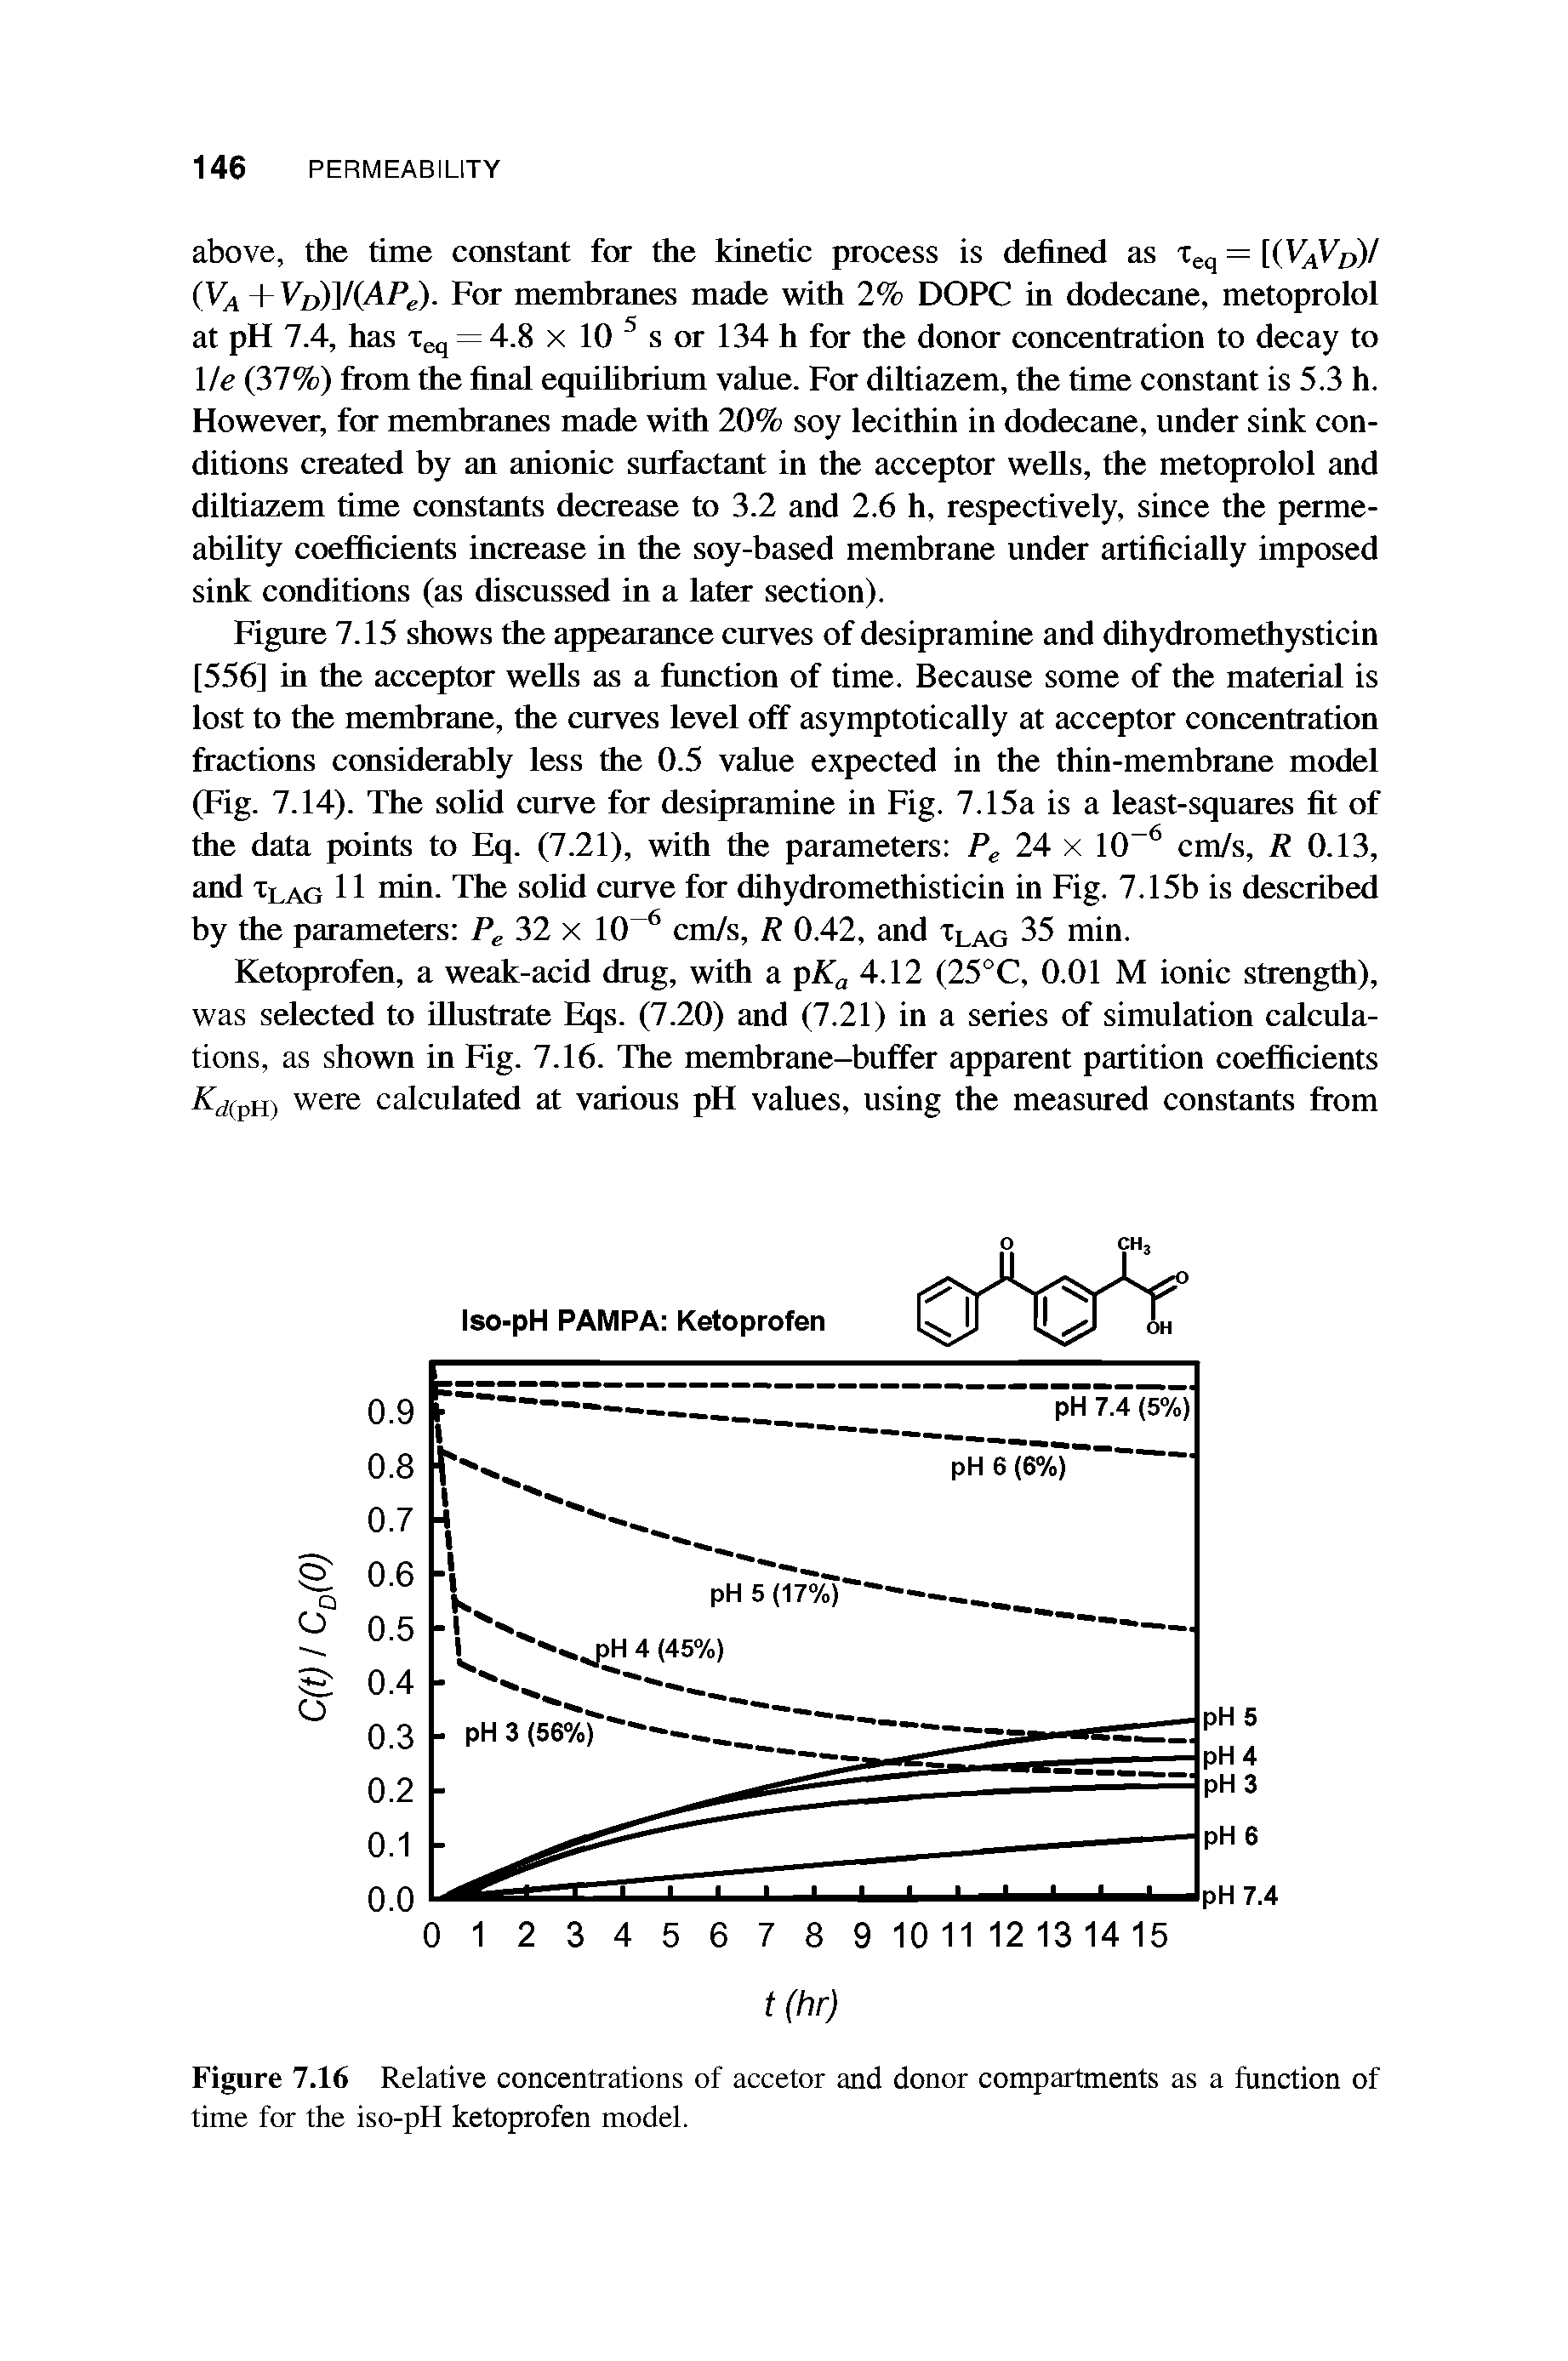 Figure 7.15 shows the appearance curves of desipramine and dihydromethysticin [556] in the acceptor wells as a function of time. Because some of the material is lost to the membrane, the curves level off asymptotically at acceptor concentration fractions considerably less the 0.5 value expected in the thin-membrane model (Fig. 7.14). The solid curve for desipramine in Fig. 7.15a is a least-squares fit of the data points to Eq. (7.21), with the parameters Pe 24 x 10-6 cm/s, R 0.13, and xLAG 11 min. The solid curve for dihydromethisticin in Fig. 7.15b is described by the parameters Pe 32 x 10 6 cm/s, R 0.42, and xLAG 35 min.